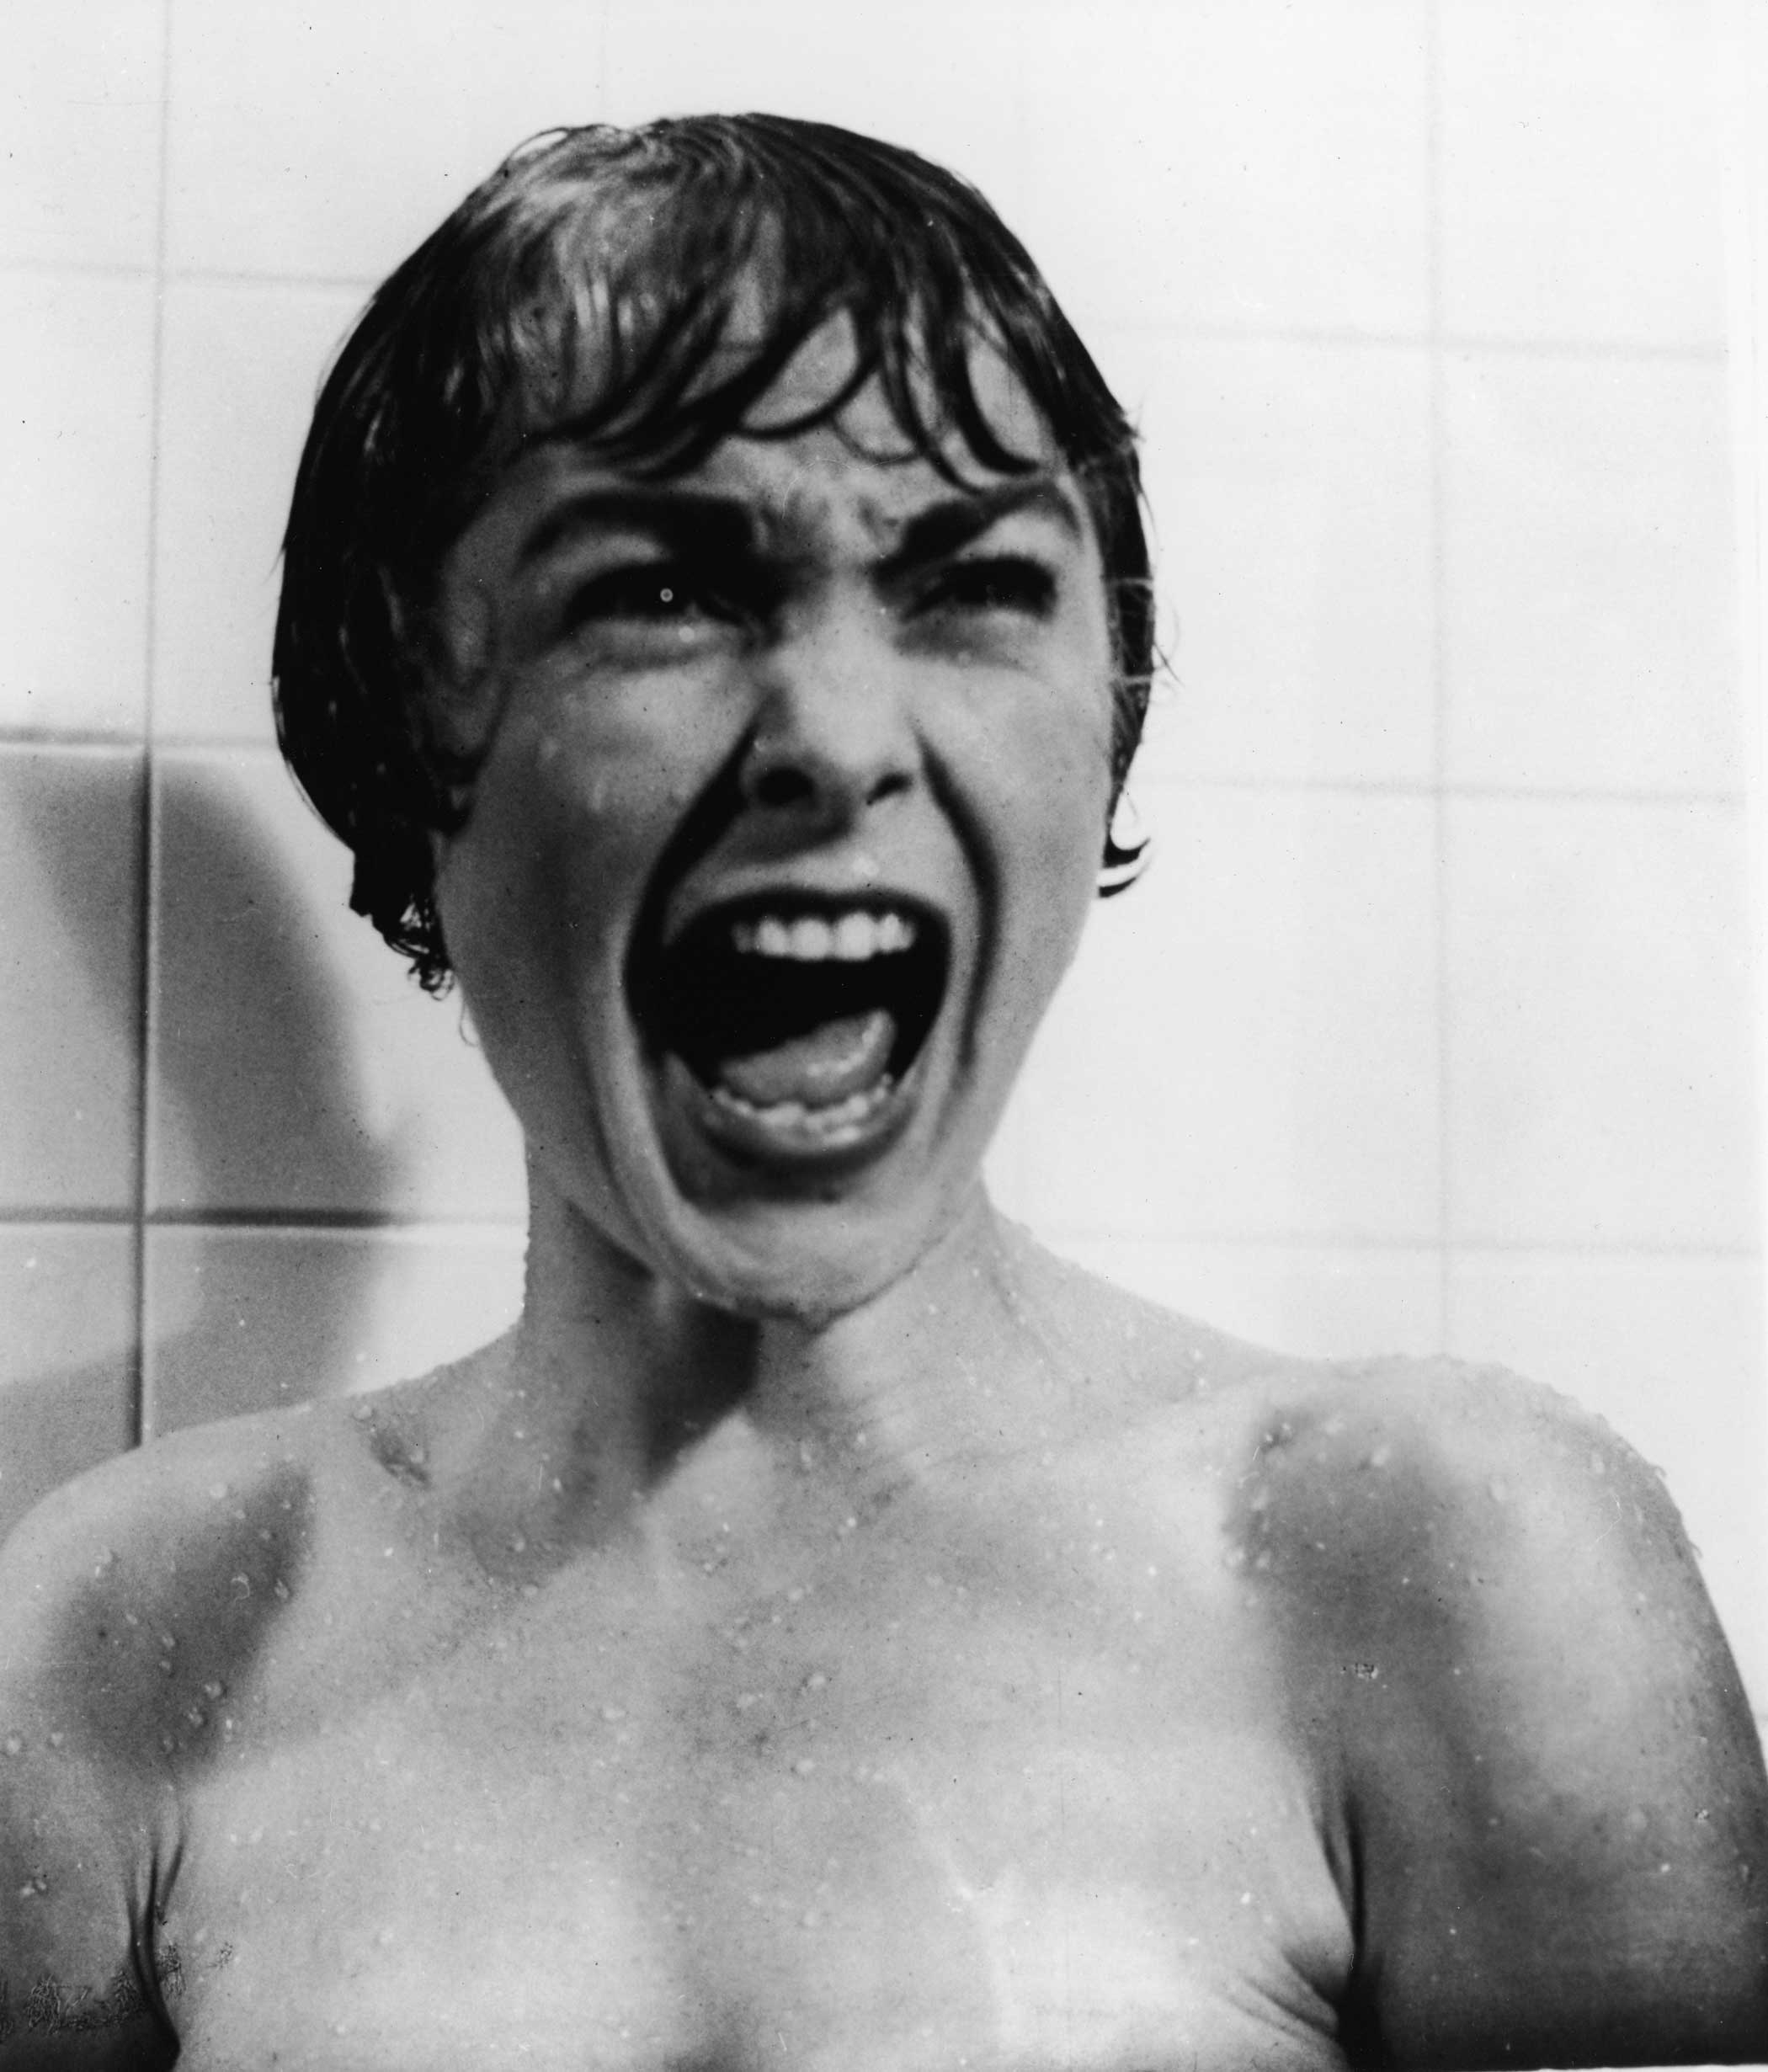 Psycho, 1960 The famed psychological thriller, starring Anthony Perkins as the peculiar Norman Bates, was inspired by the murders of Ed Gein. Writer Robert Bloch lived just 40 miles from Gein in Wisconsin, both Bates and Gein had deceased mothers that had been dominant figures, held a shrine to their mothers, and dressed in women's clothing.